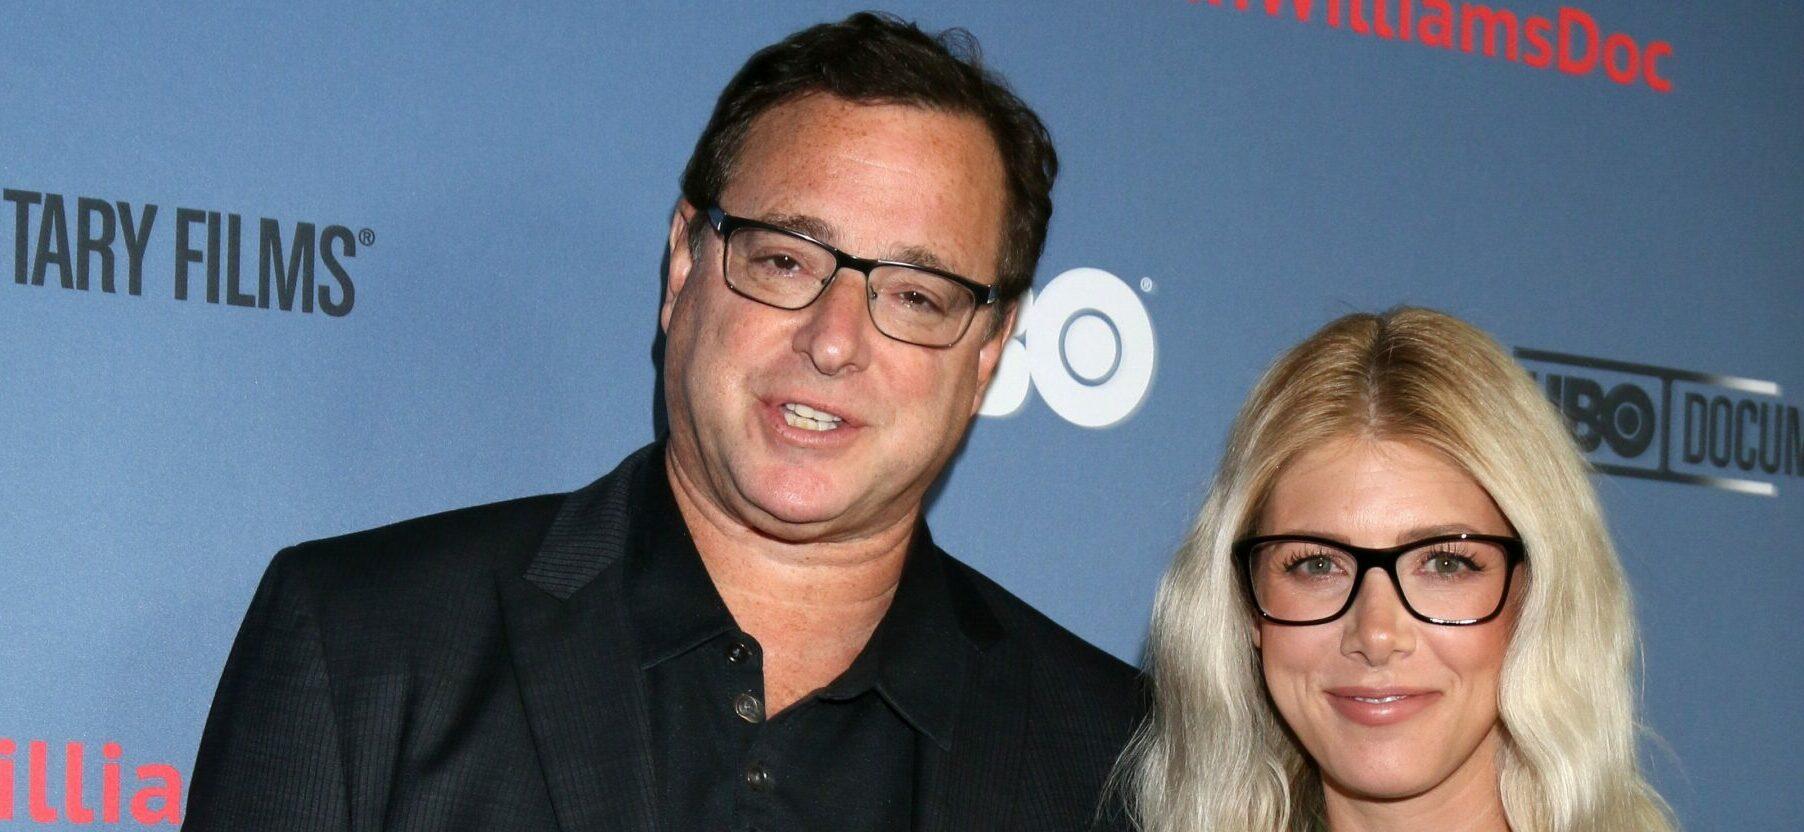 Bob Saget and Kelly Rizzo at HBO Documentary Films' Premiere Of "Robin Williams: Come Inside My Mind" - Arrivals